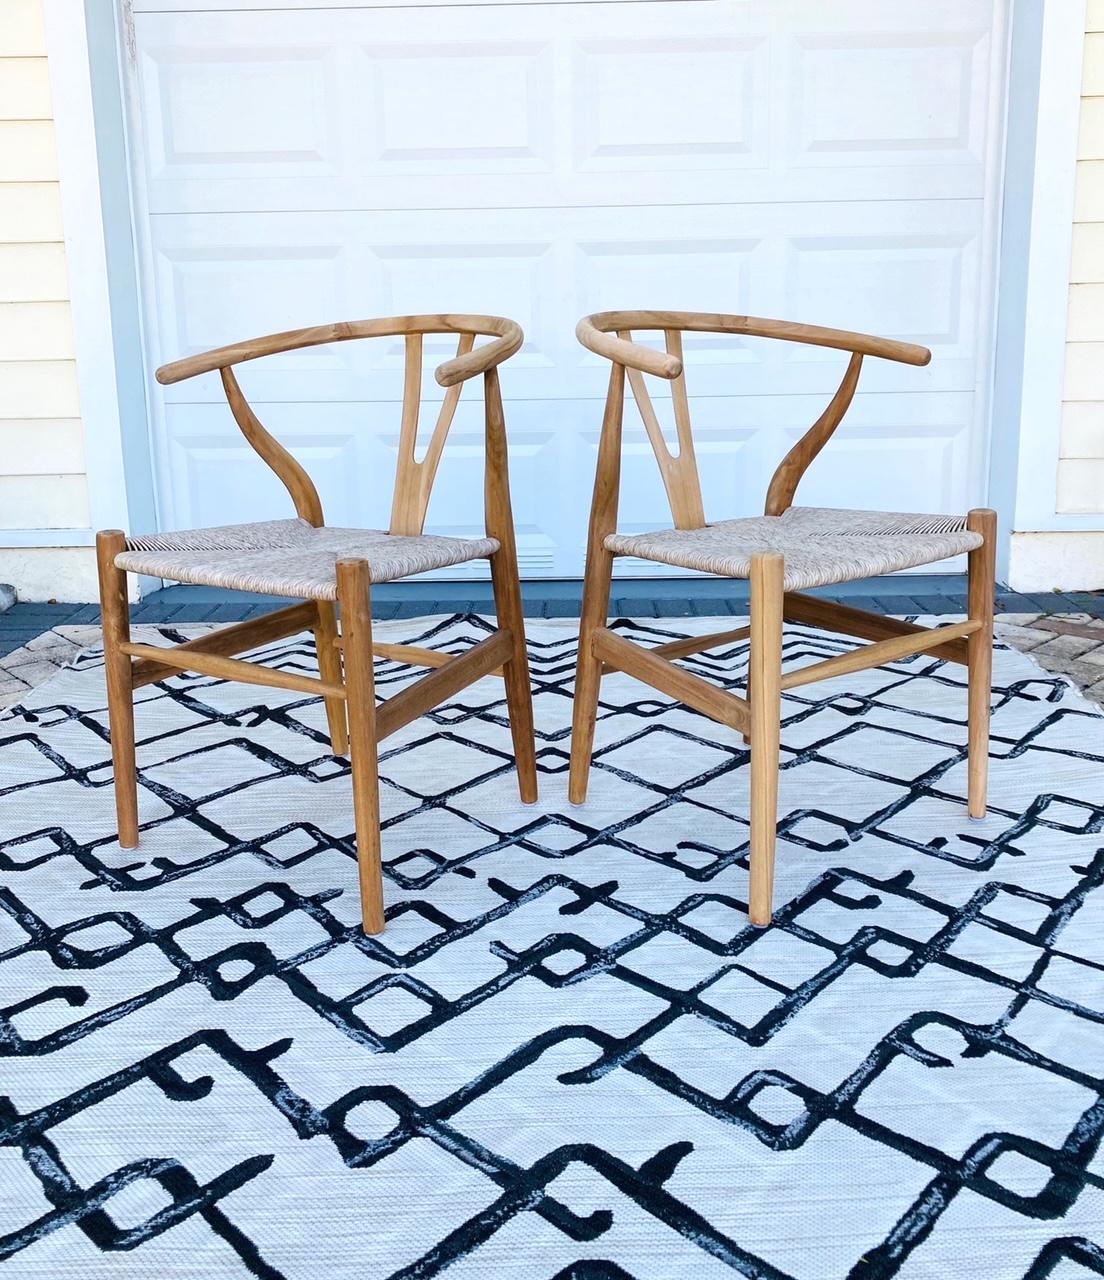 Dutch Pair of Vintage Danish Modern Chairs in Natural Teak Wood with Handwoven Seats